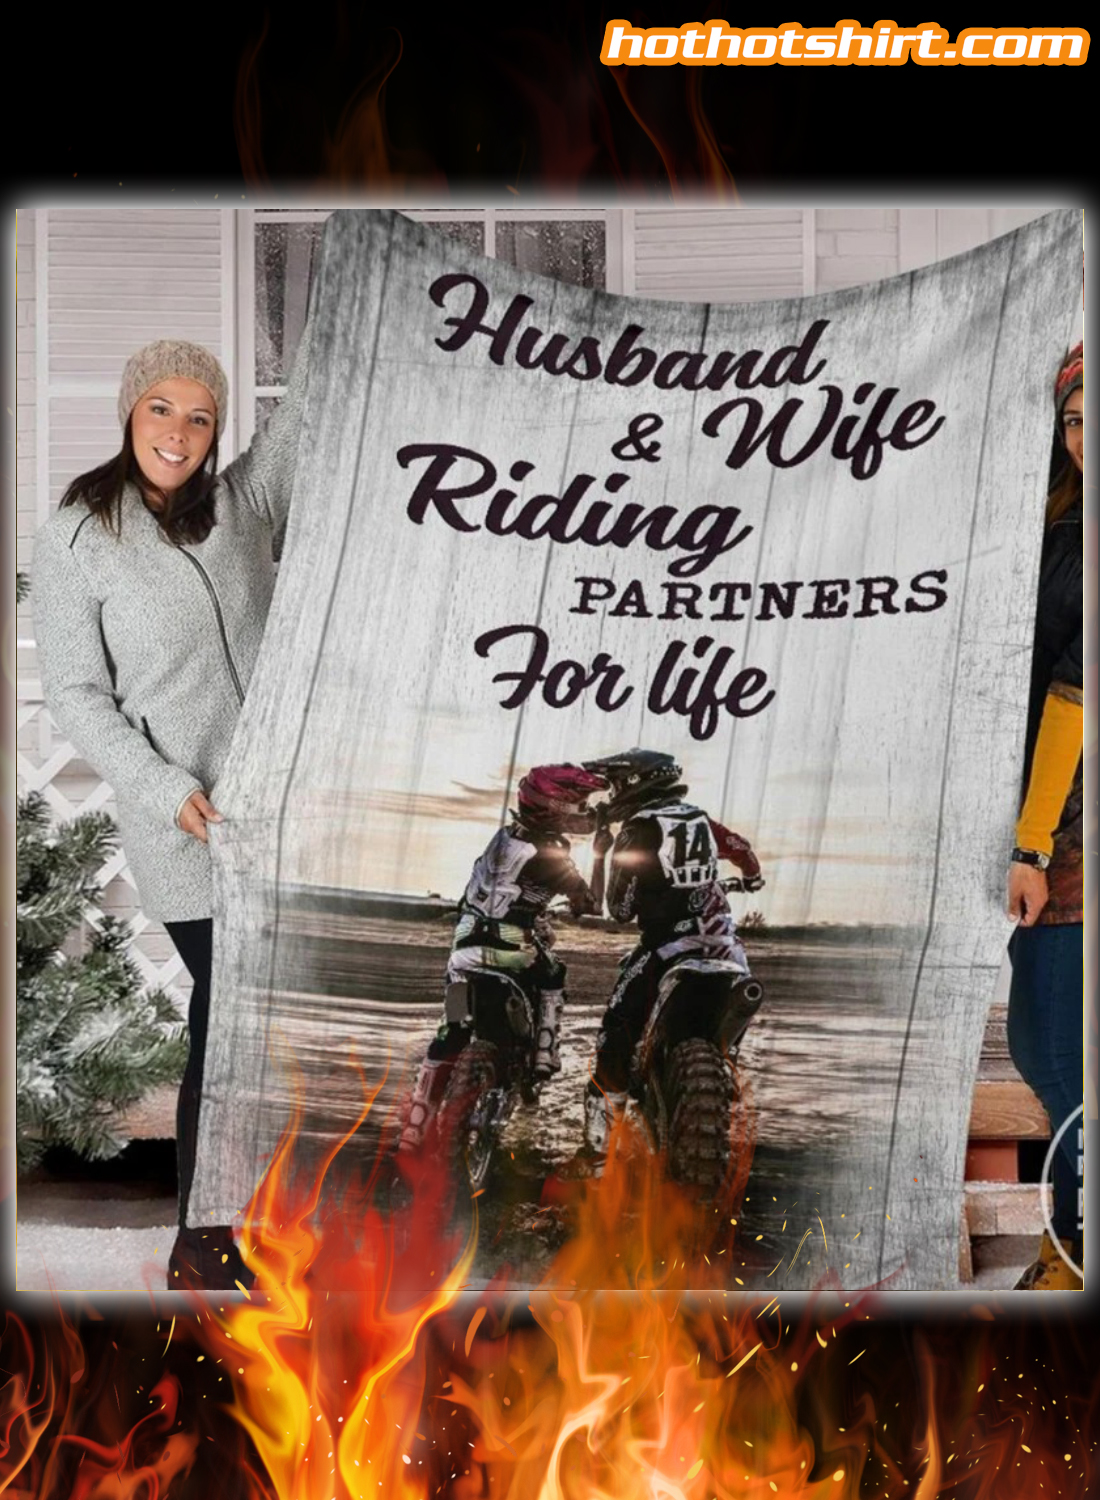 Motocross husband and wife riding partners for life blanket